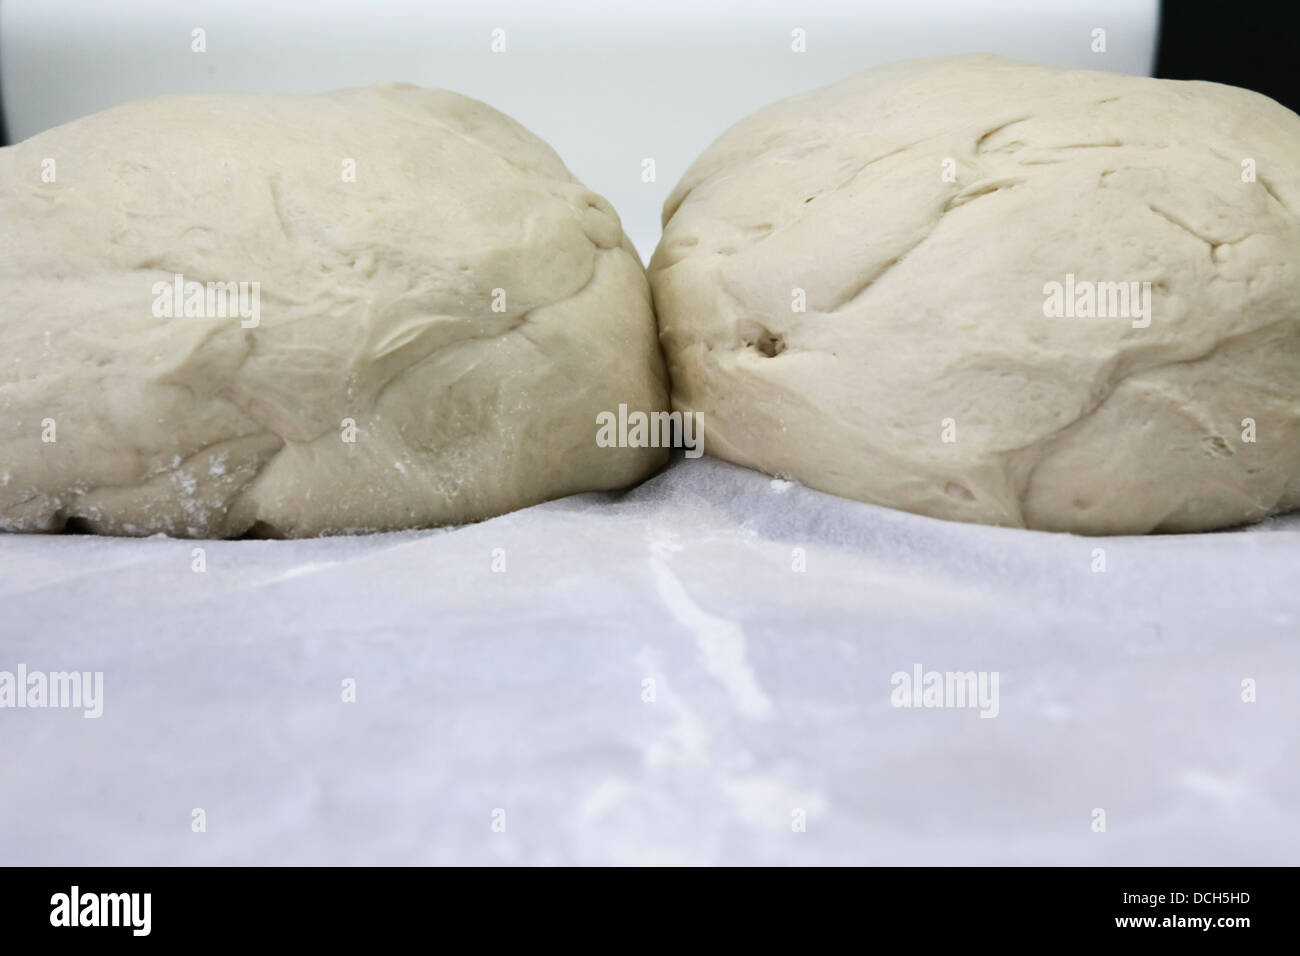 Yeast bread dough rises in a bakery Stock Photo